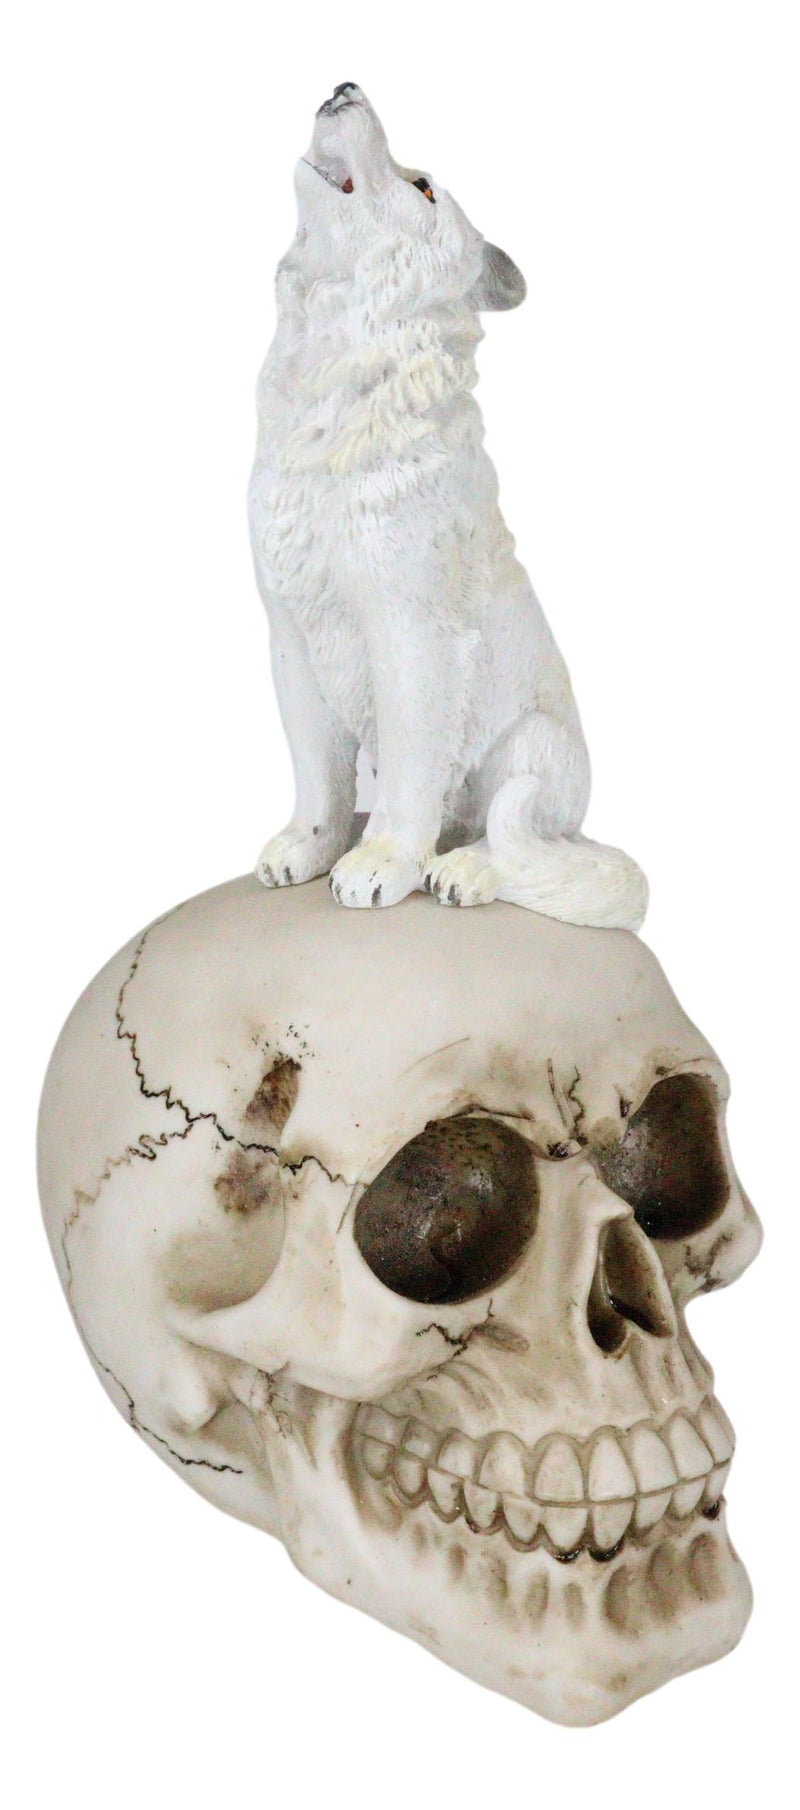 Gothic Full Moon Howling White Wolf Sitting On Graveyard Macabre Skull Figurine